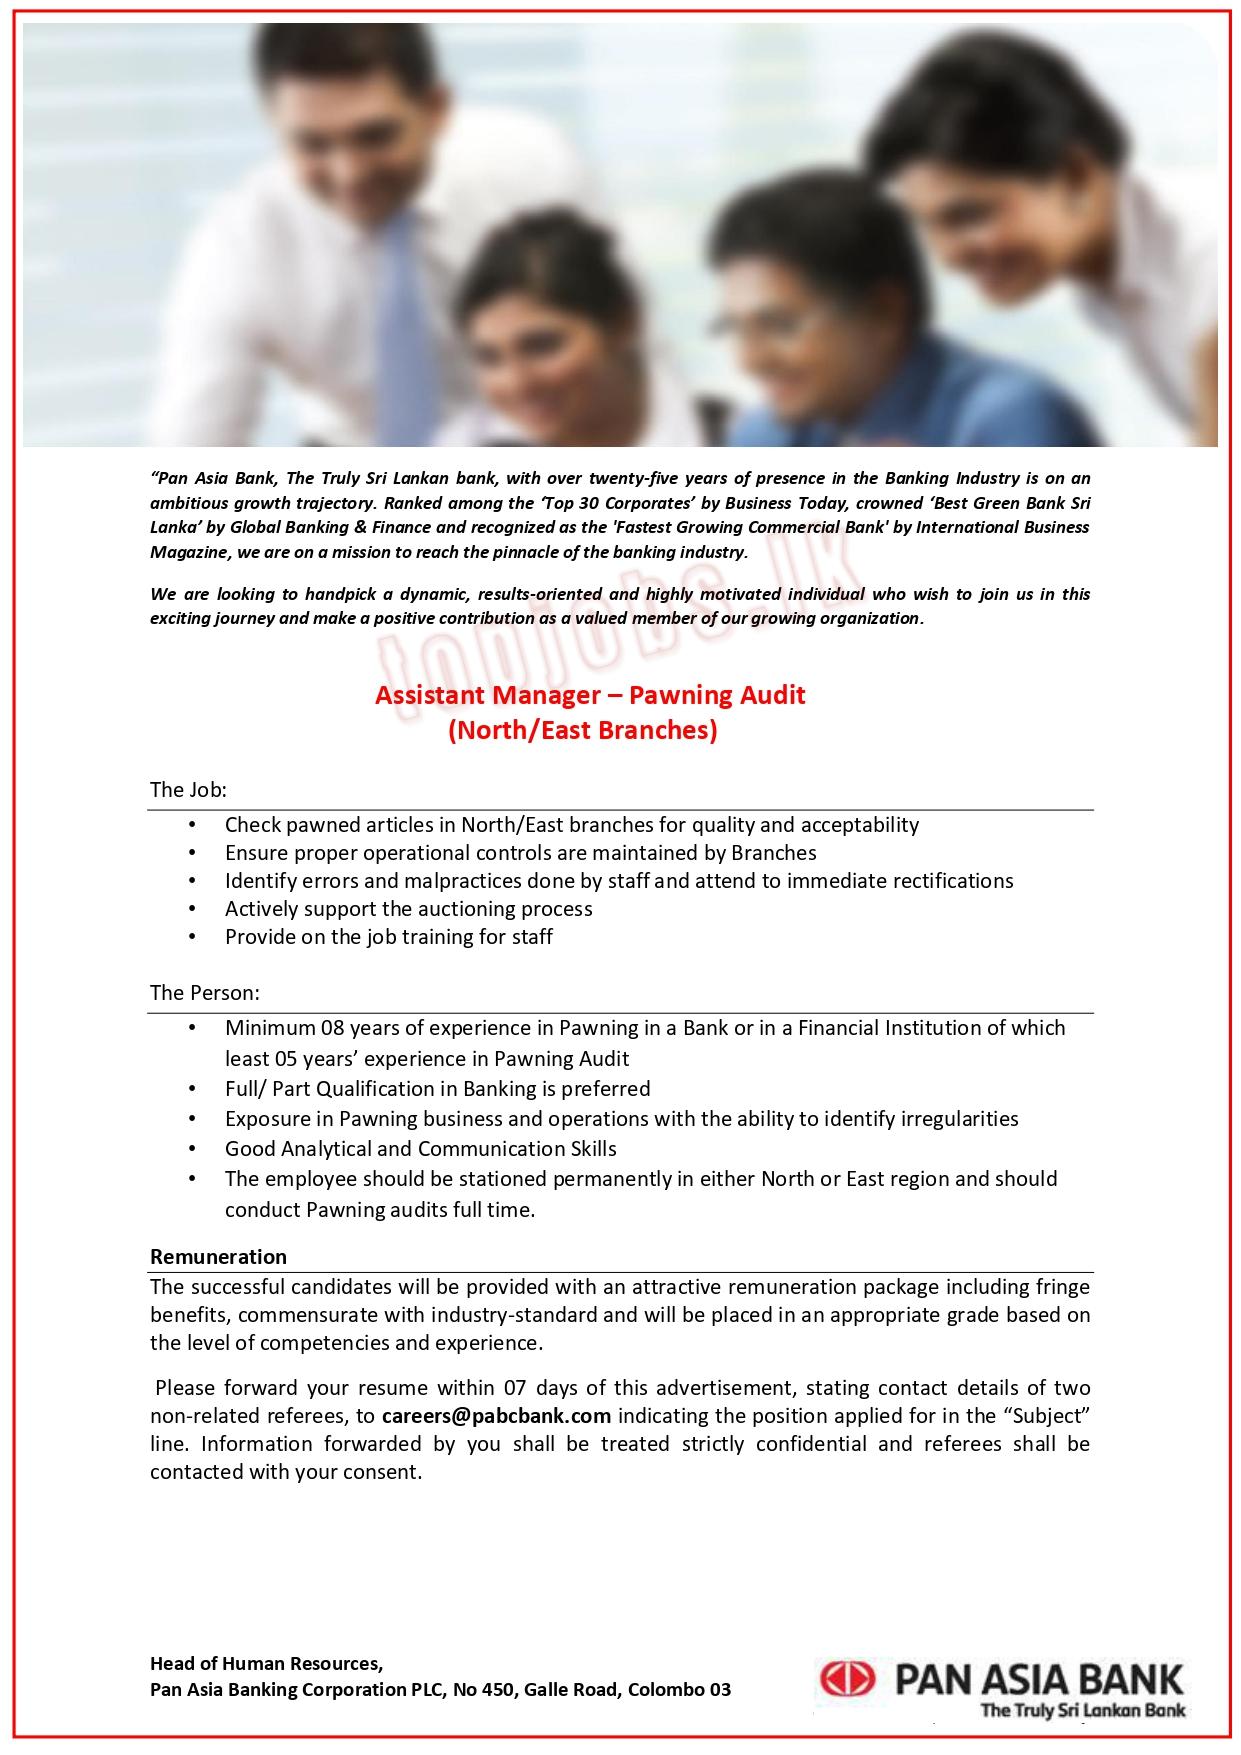 Pan Asia Bank Vacancies 2022 for Assistant Manager Pawning Audit